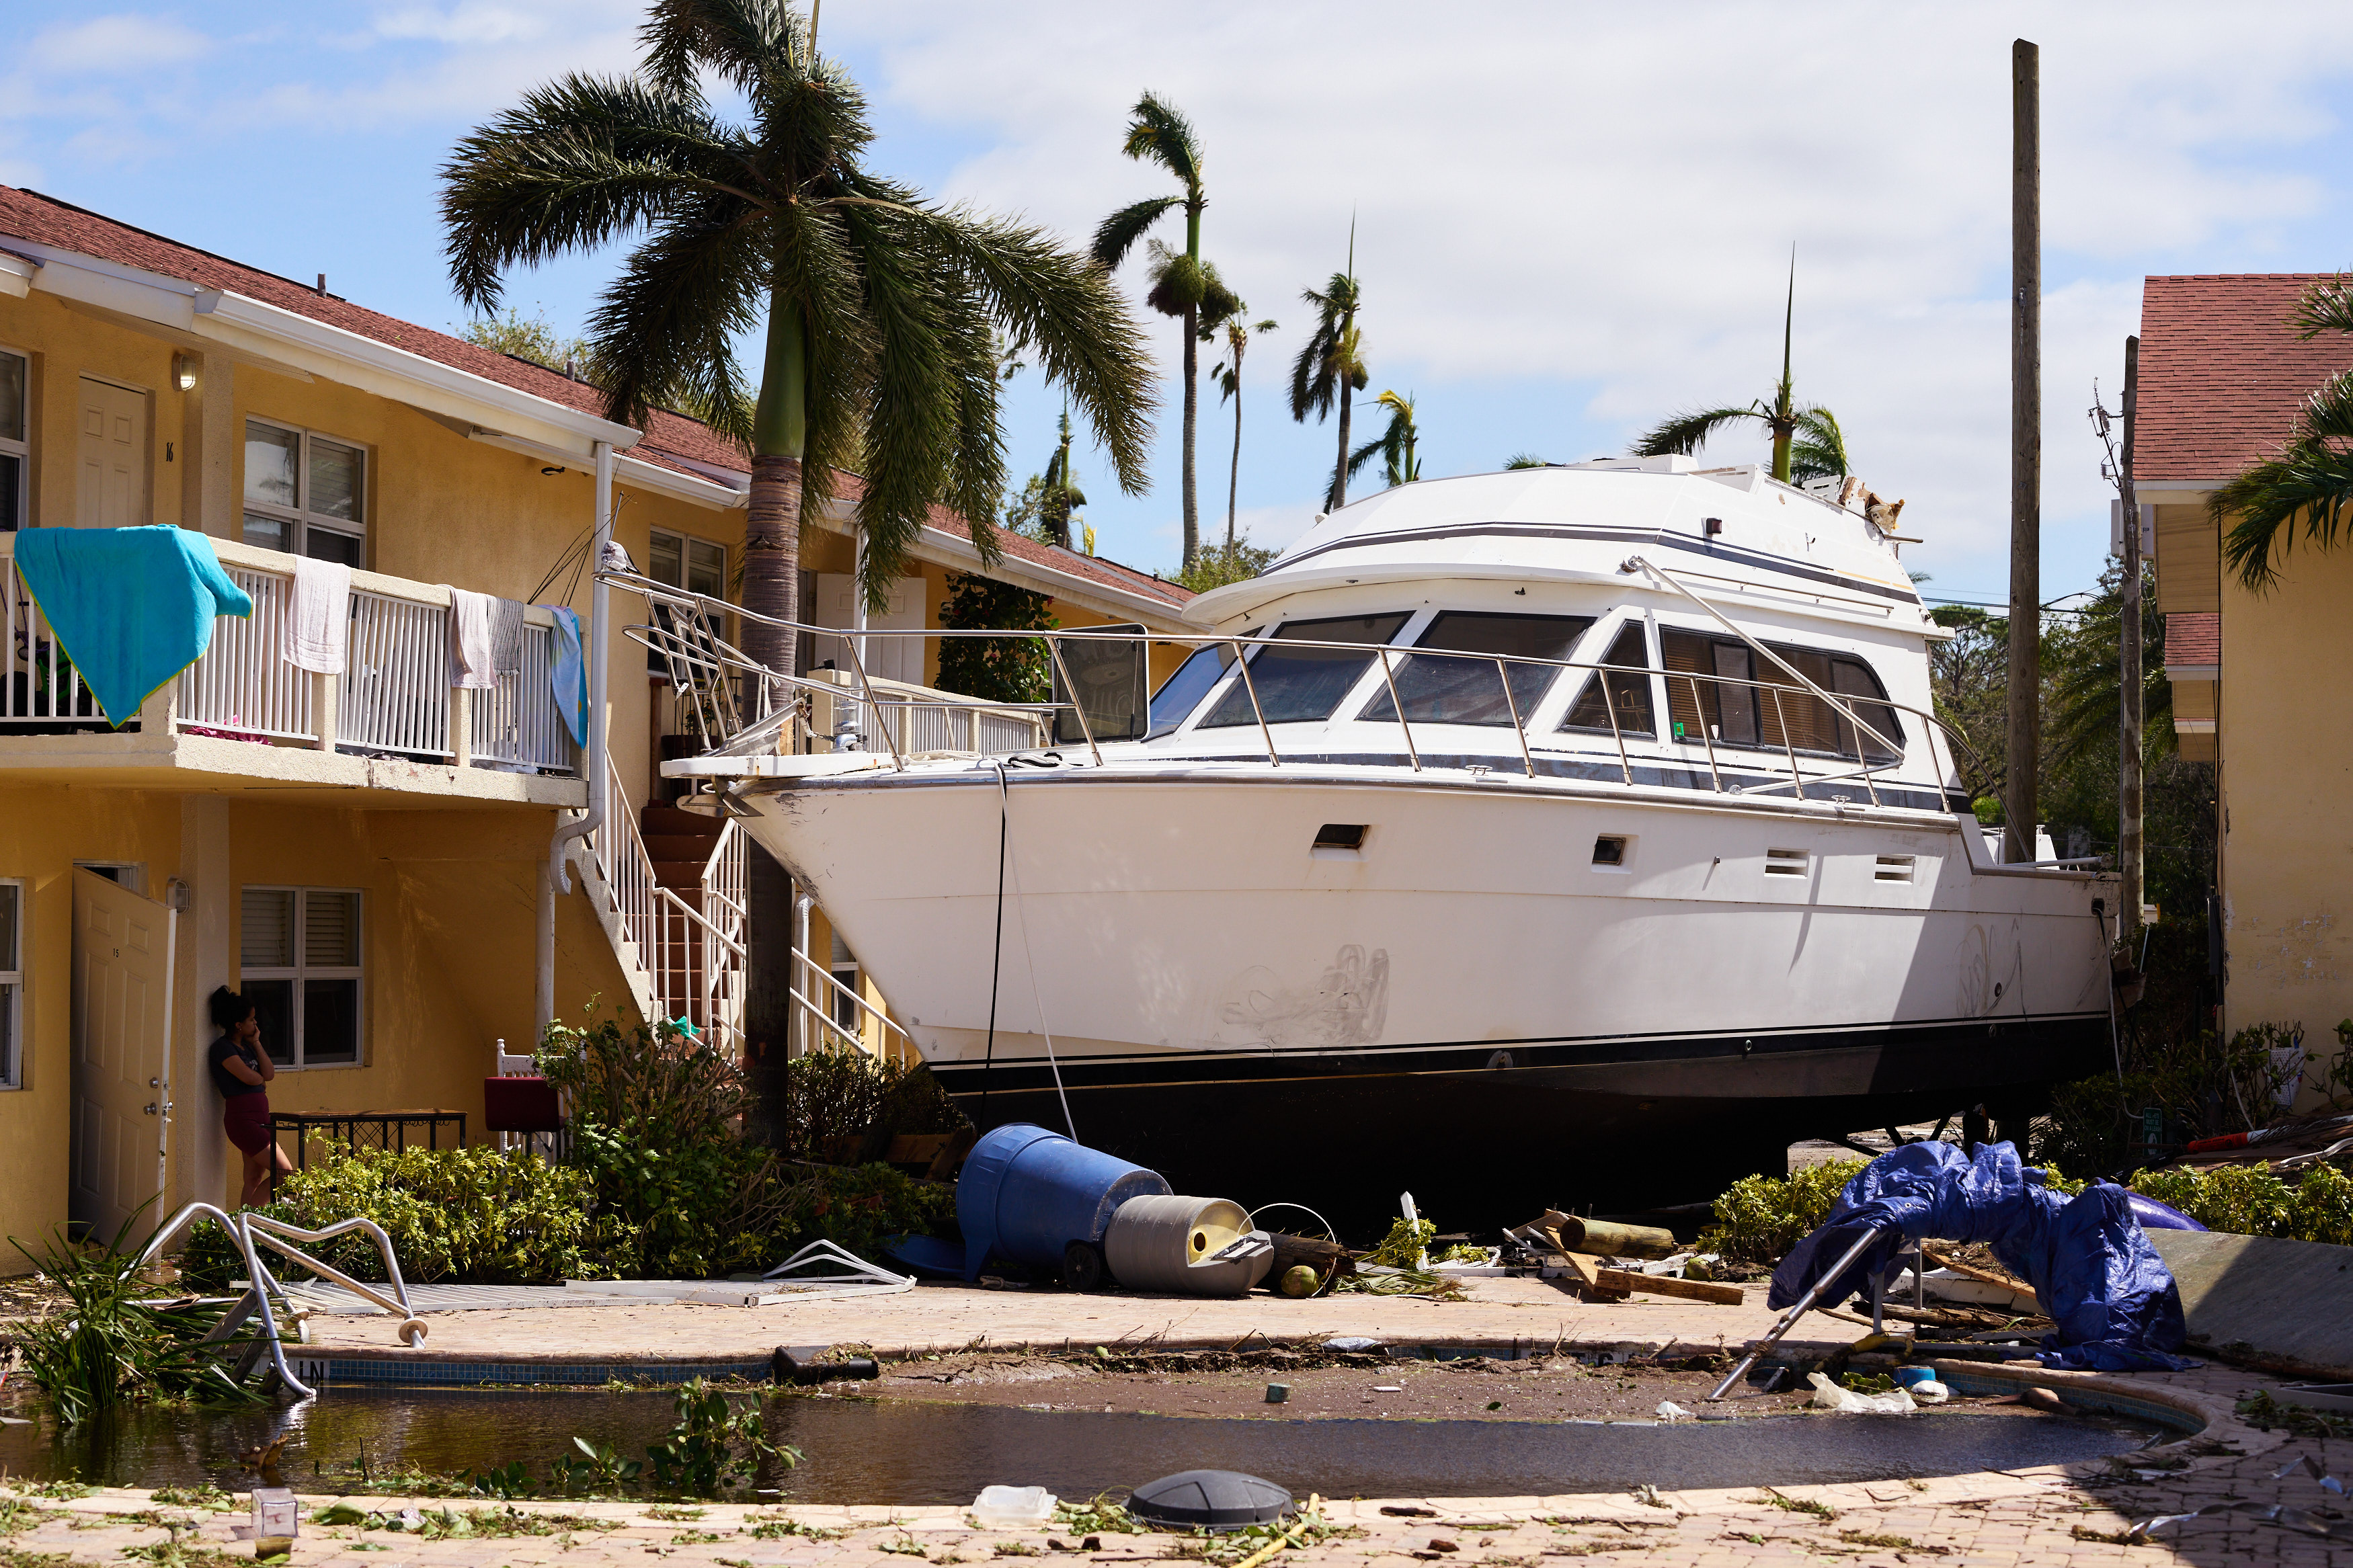 Scenes from Fort Myers in the aftermath of Hurricane Ian